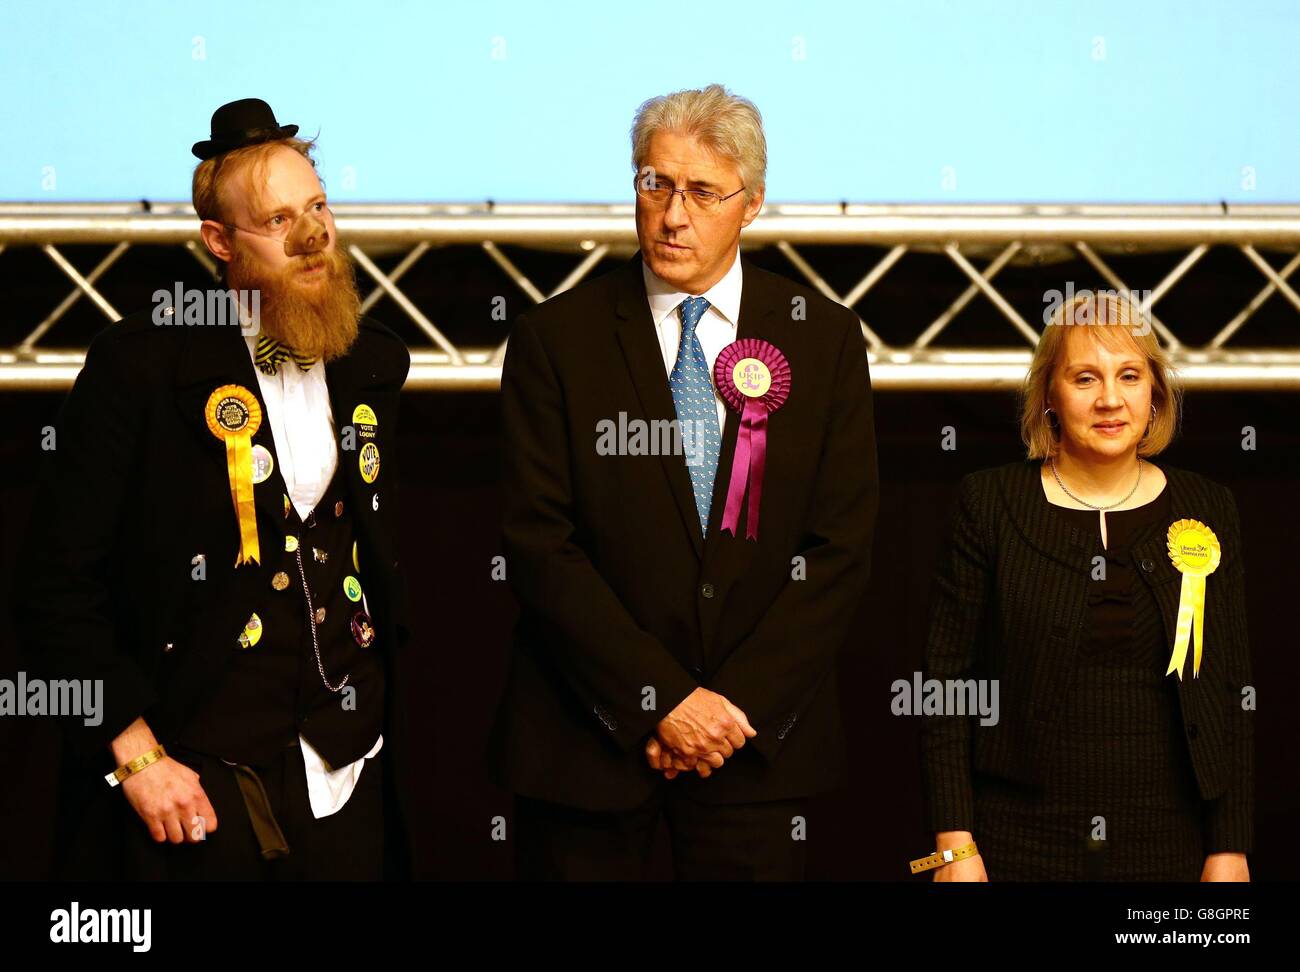 Ukip Candidate John Bickley (middle) listens to the declaration with Sir Oink Alot, candidate for the Official Monster Raving Party (left) and Lib-Dem candidate Jane Brophy (right) at the Oldham West and Royton constituency by-election count held at the Civic Centre in Oldham. Stock Photo